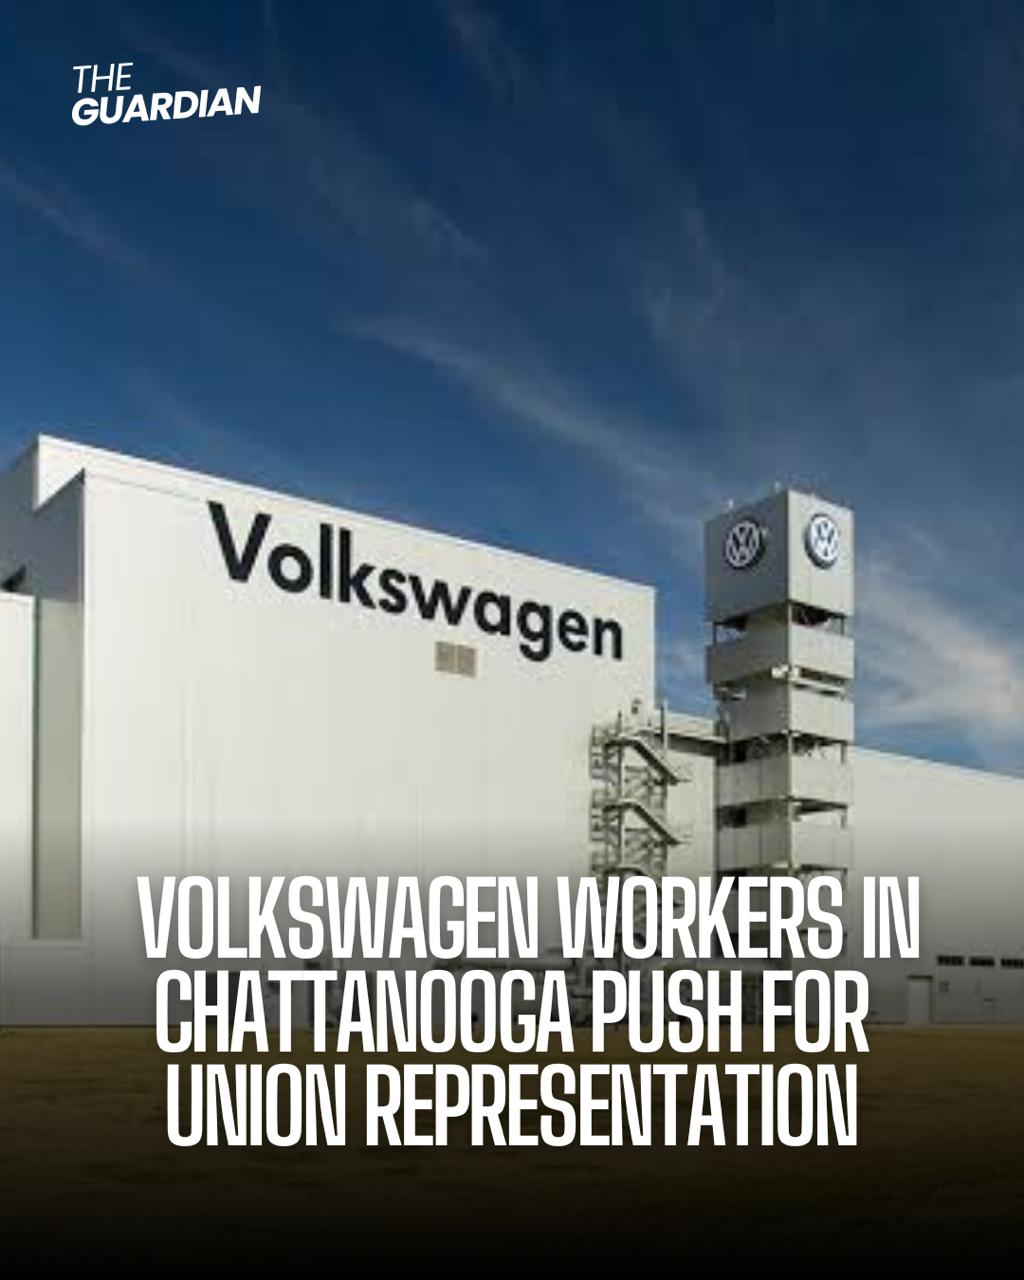 According to the UAW, the Tennessee factory is now the only Volkswagen plant globally without union representation.